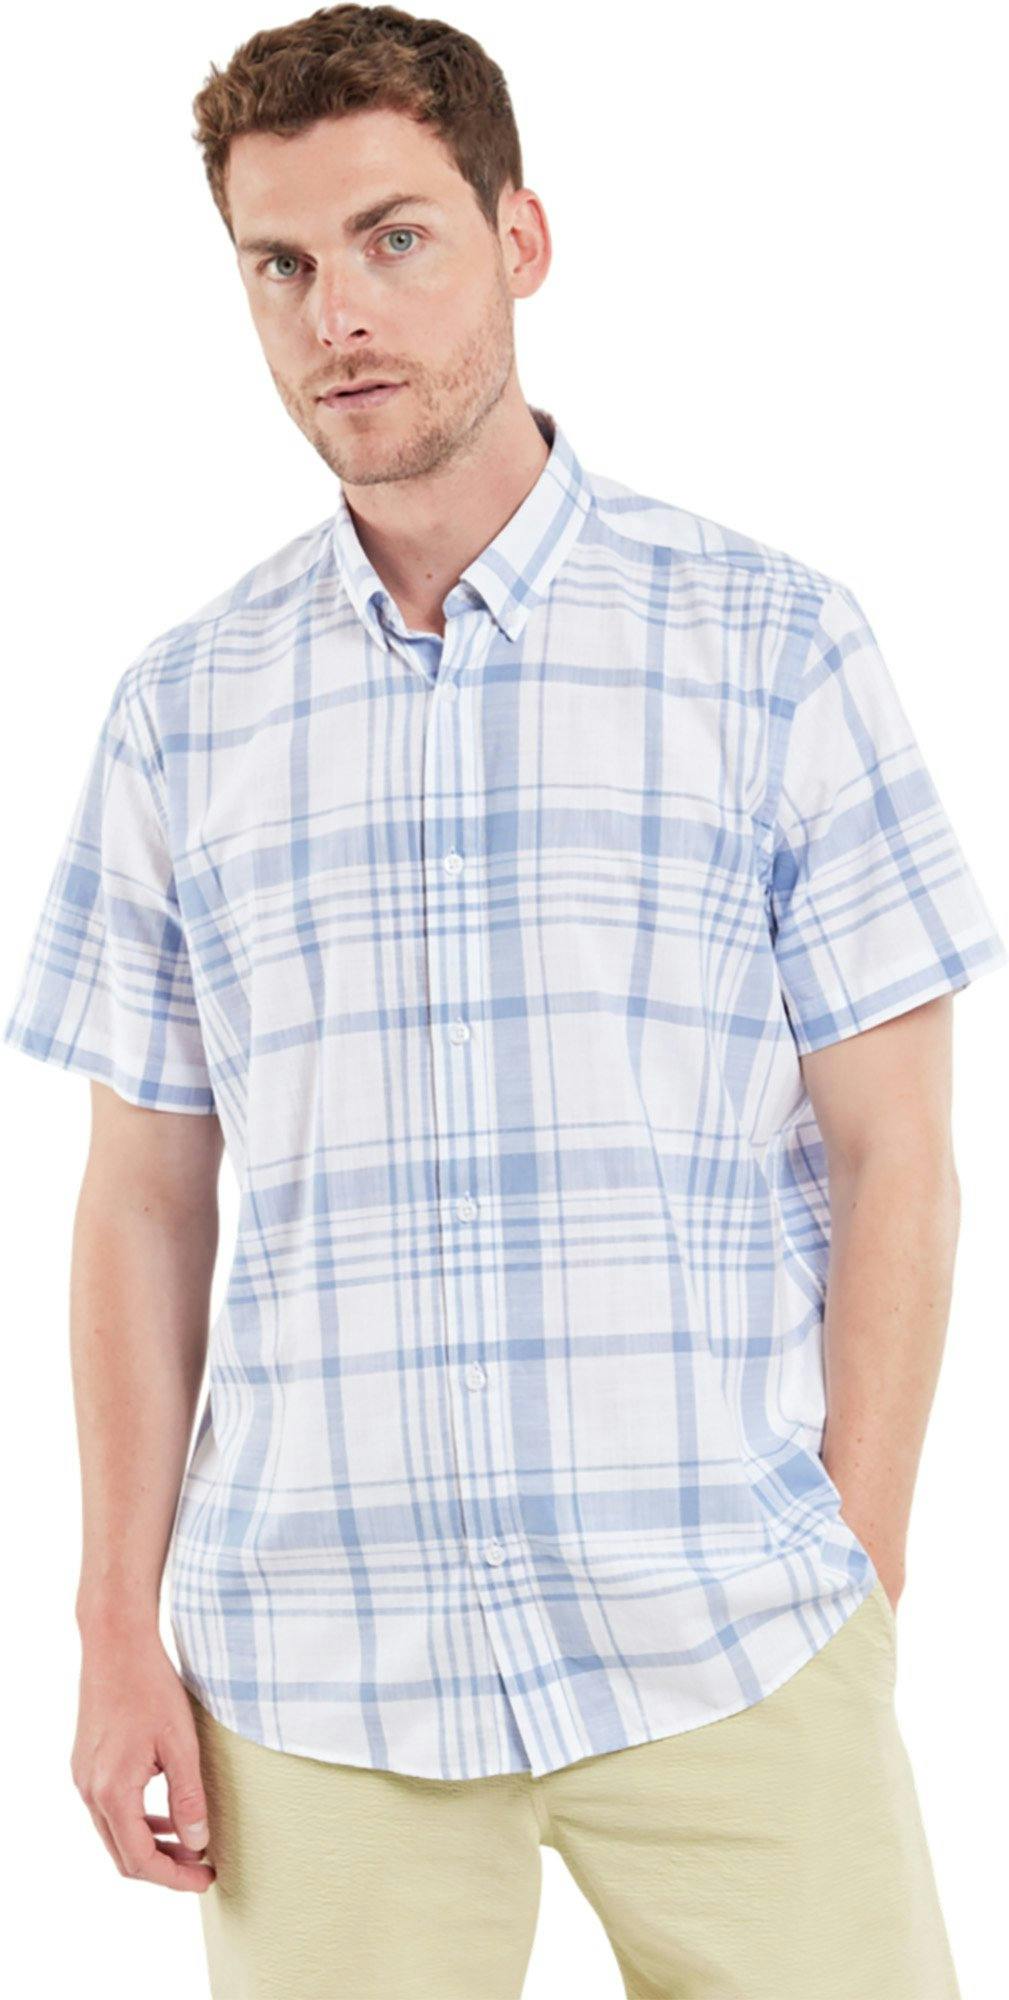 Product image for Short Sleeve Cotton Shirt - Men's